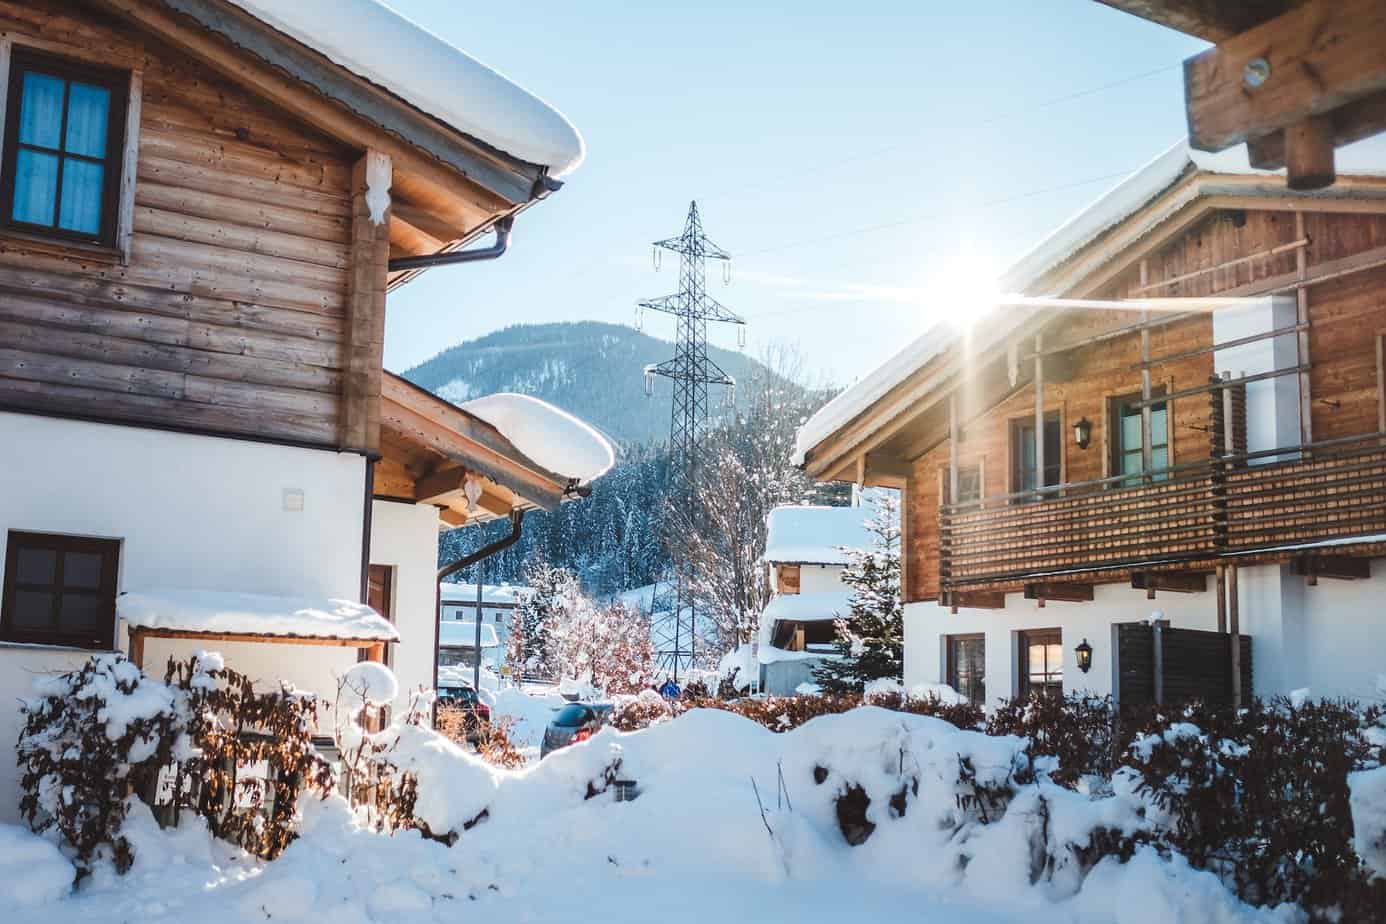 houses in city during winter - Ways to recharge after a day on the slopes